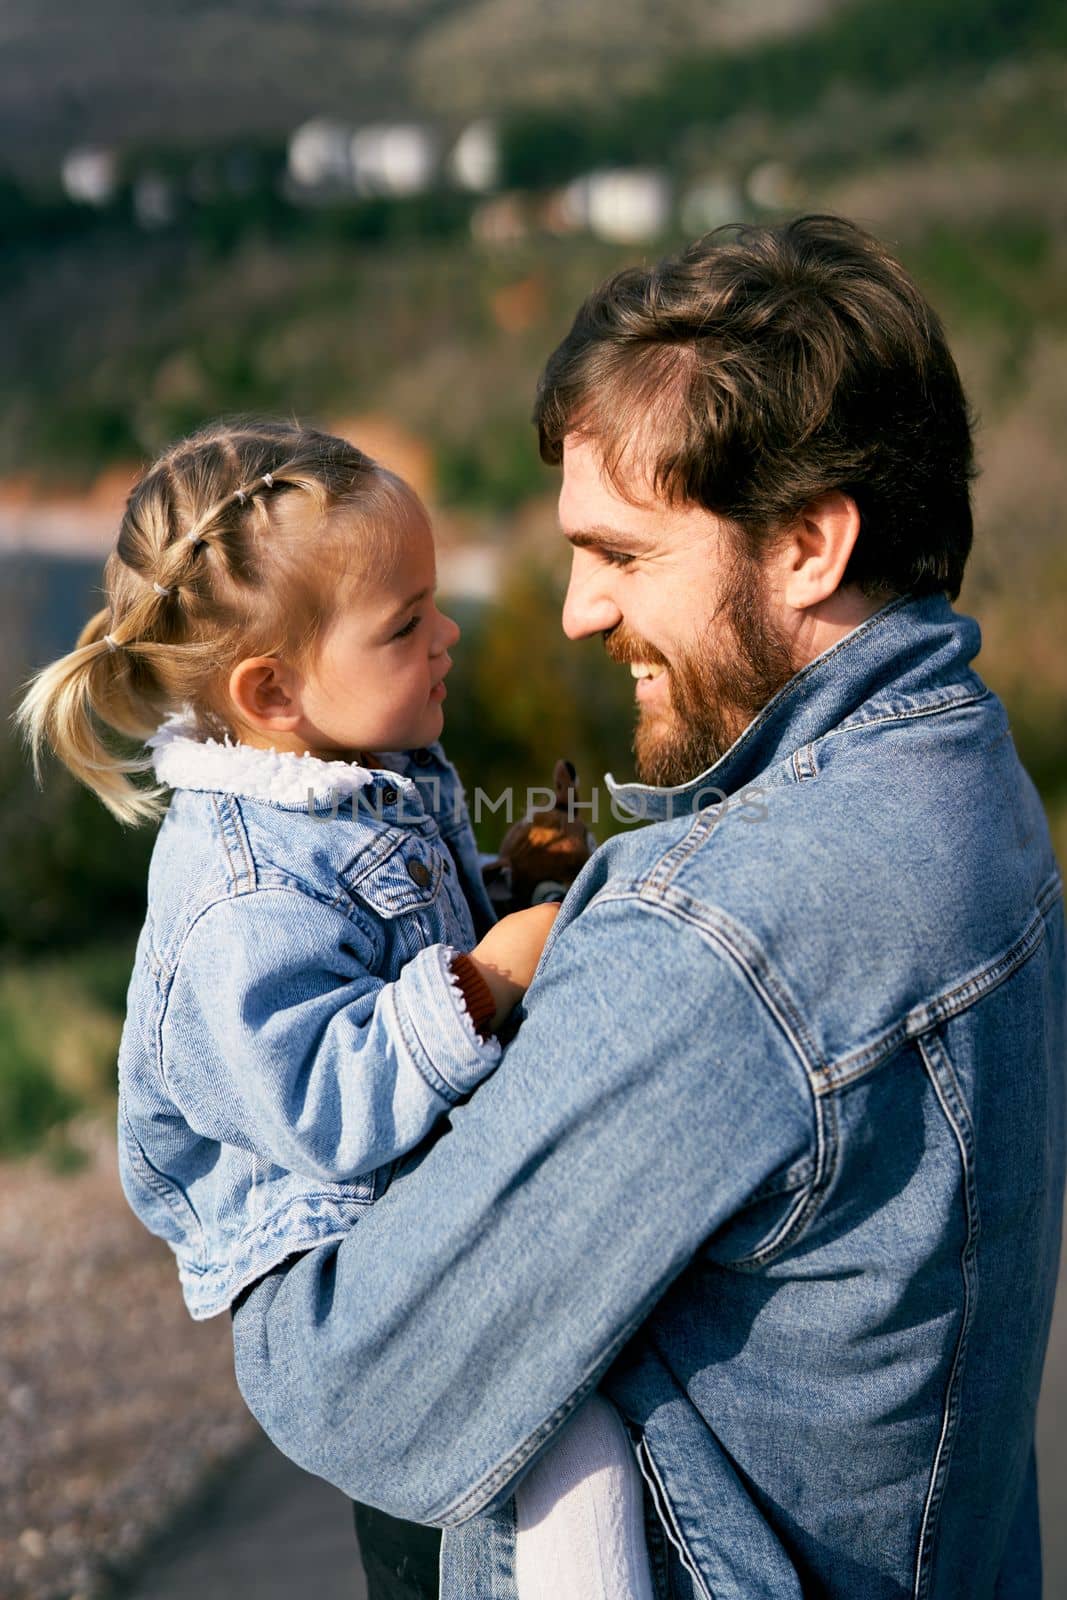 Smiling dad holds a smiling little girl face to face in his arms. Close-up. High quality photo